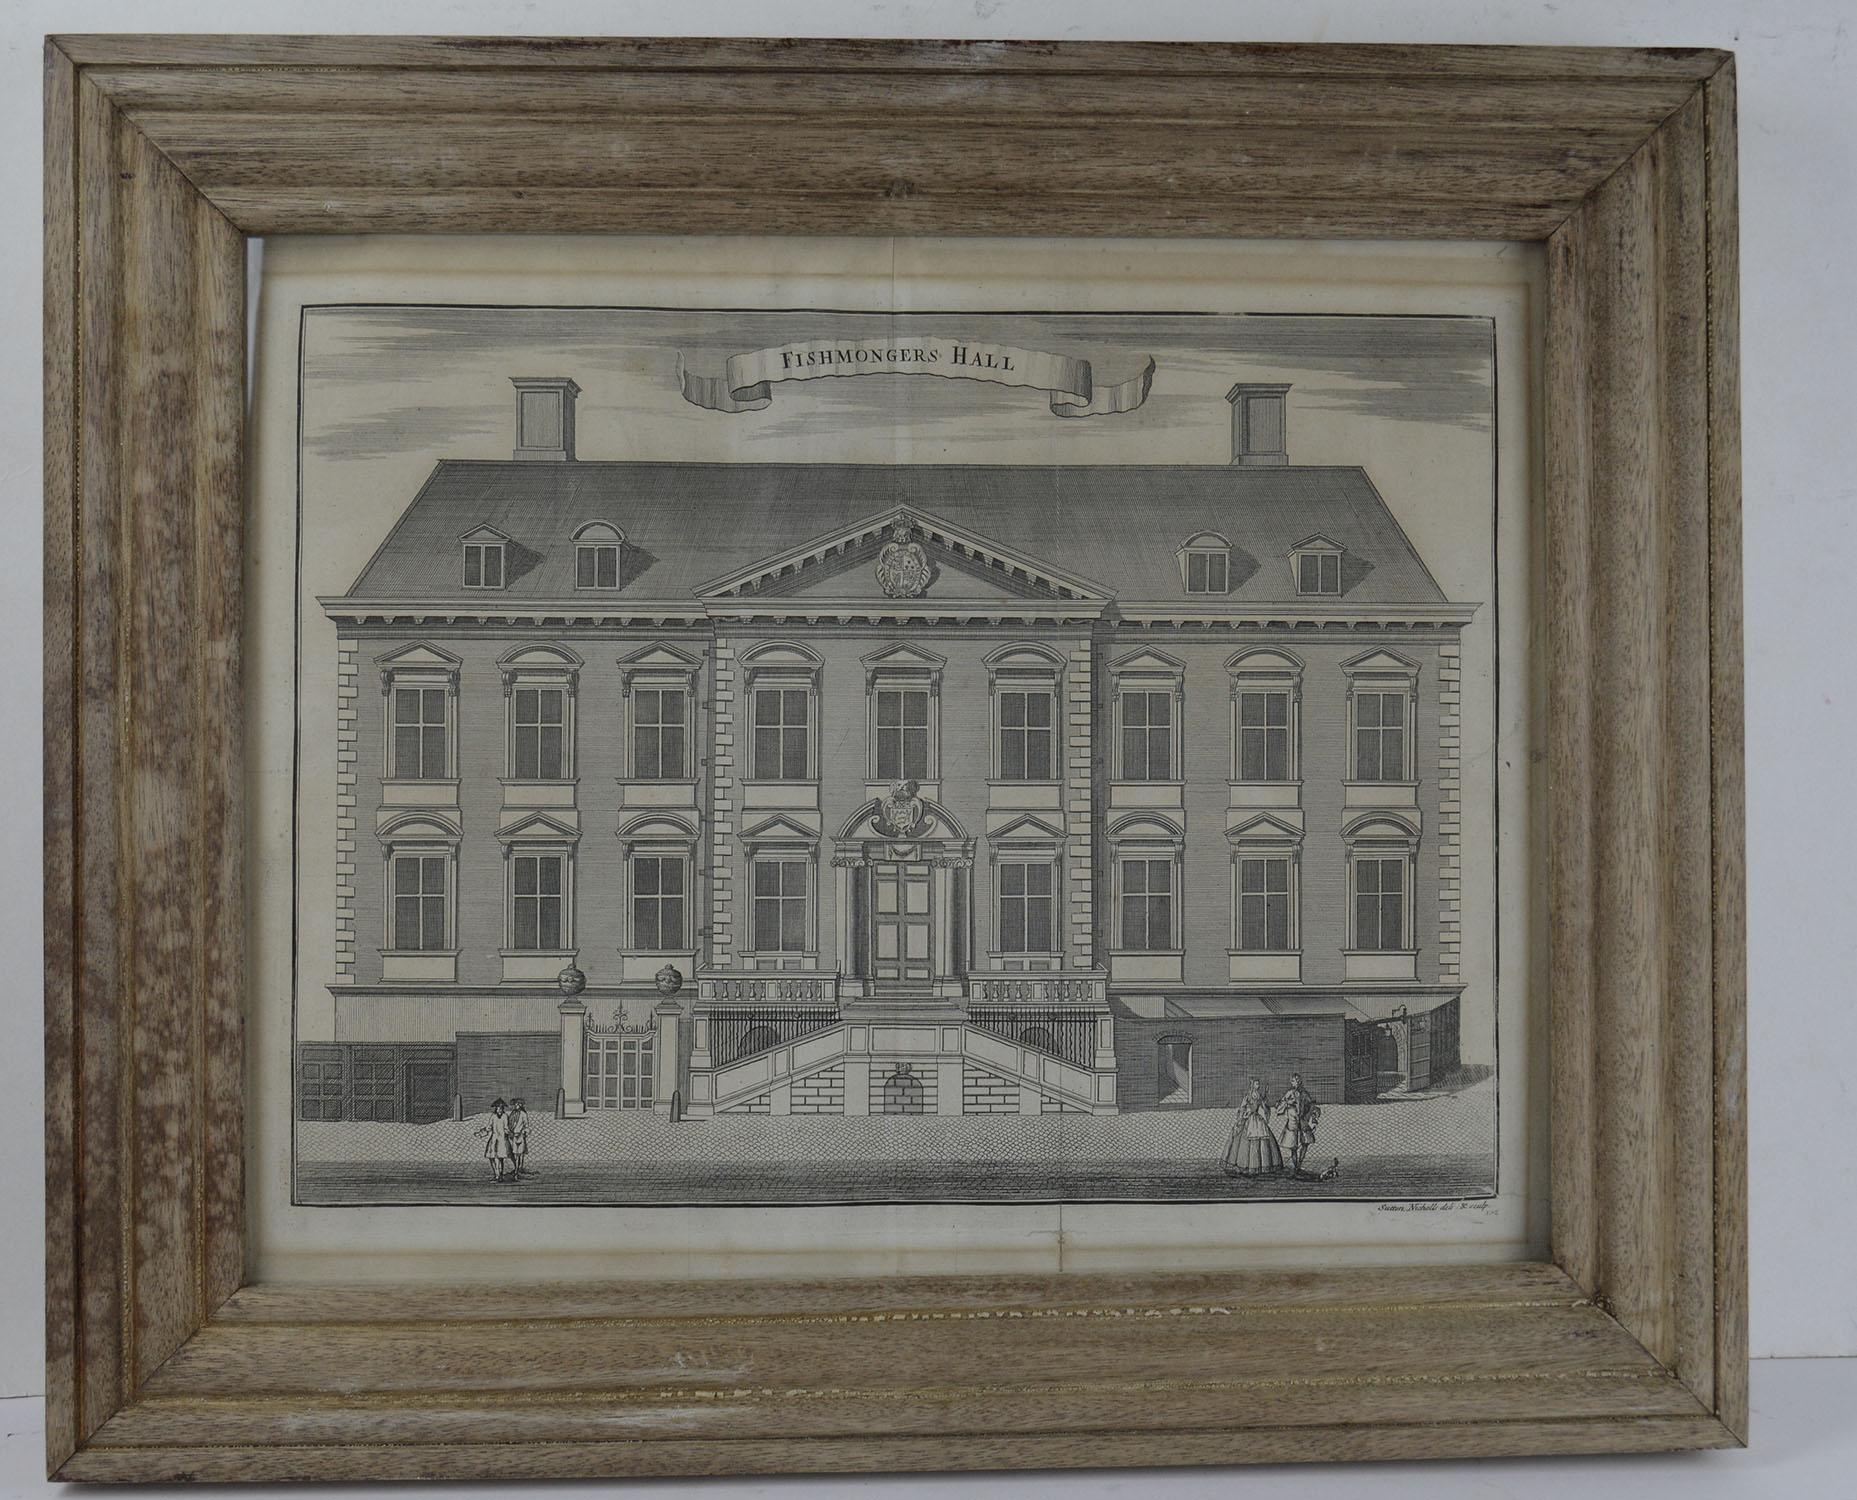 English Set of 4 Antique Architectural Prints, London, Dated 1754